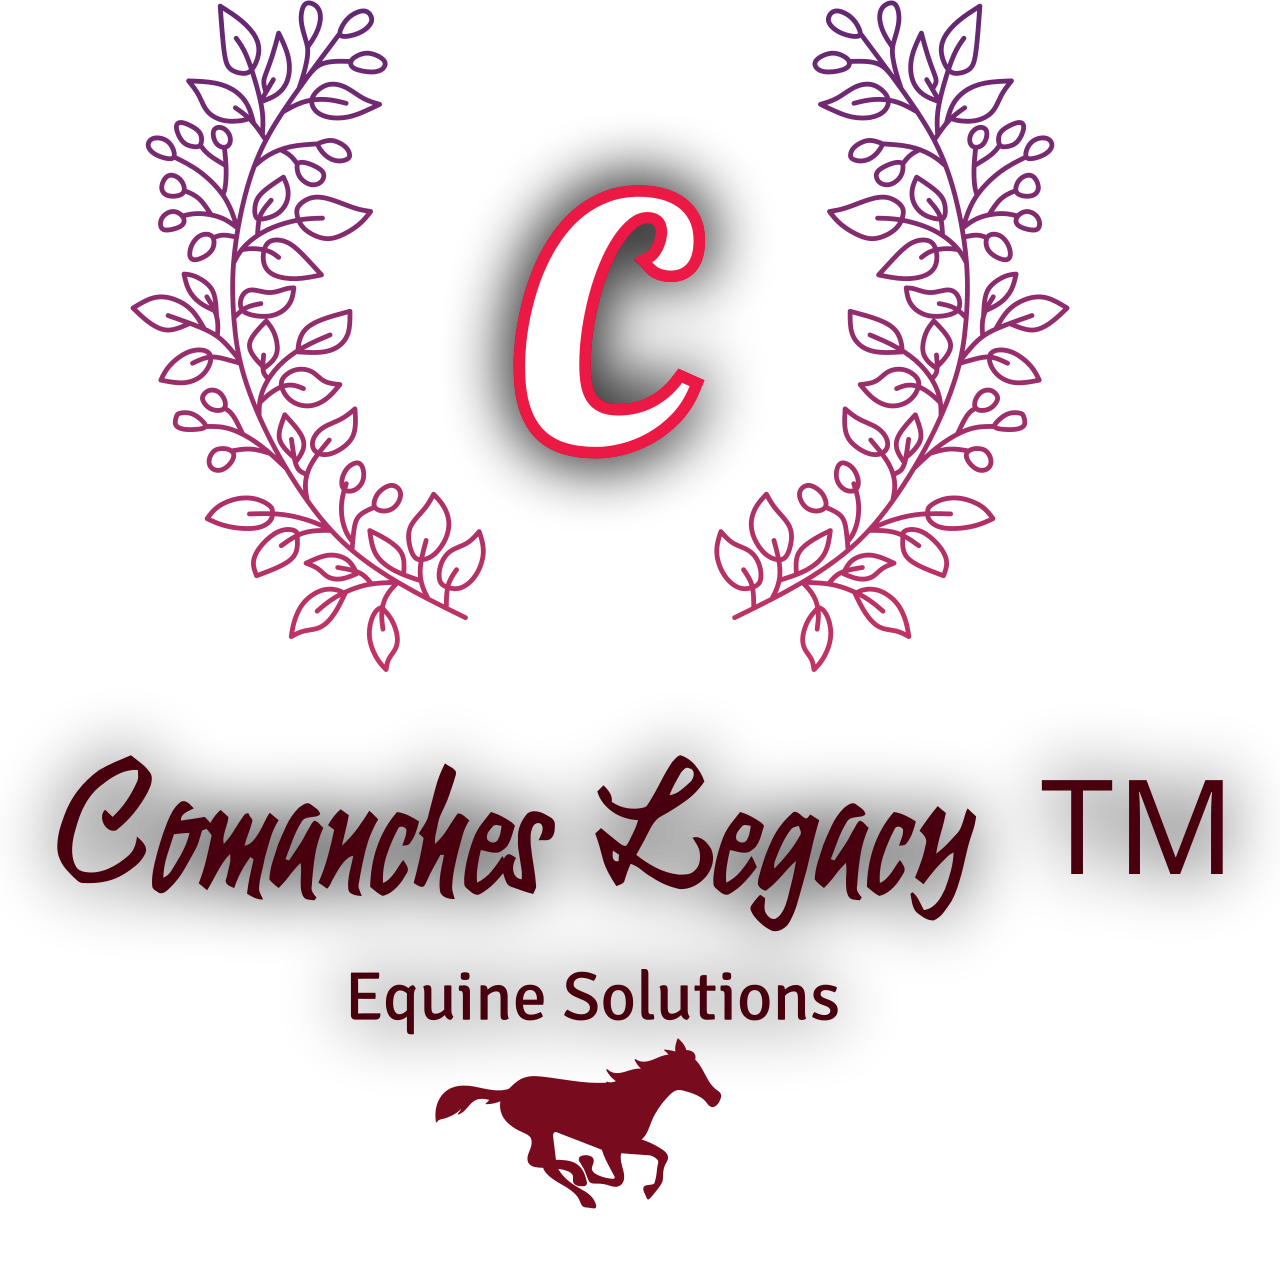 Comanches Legacy ™'s web page